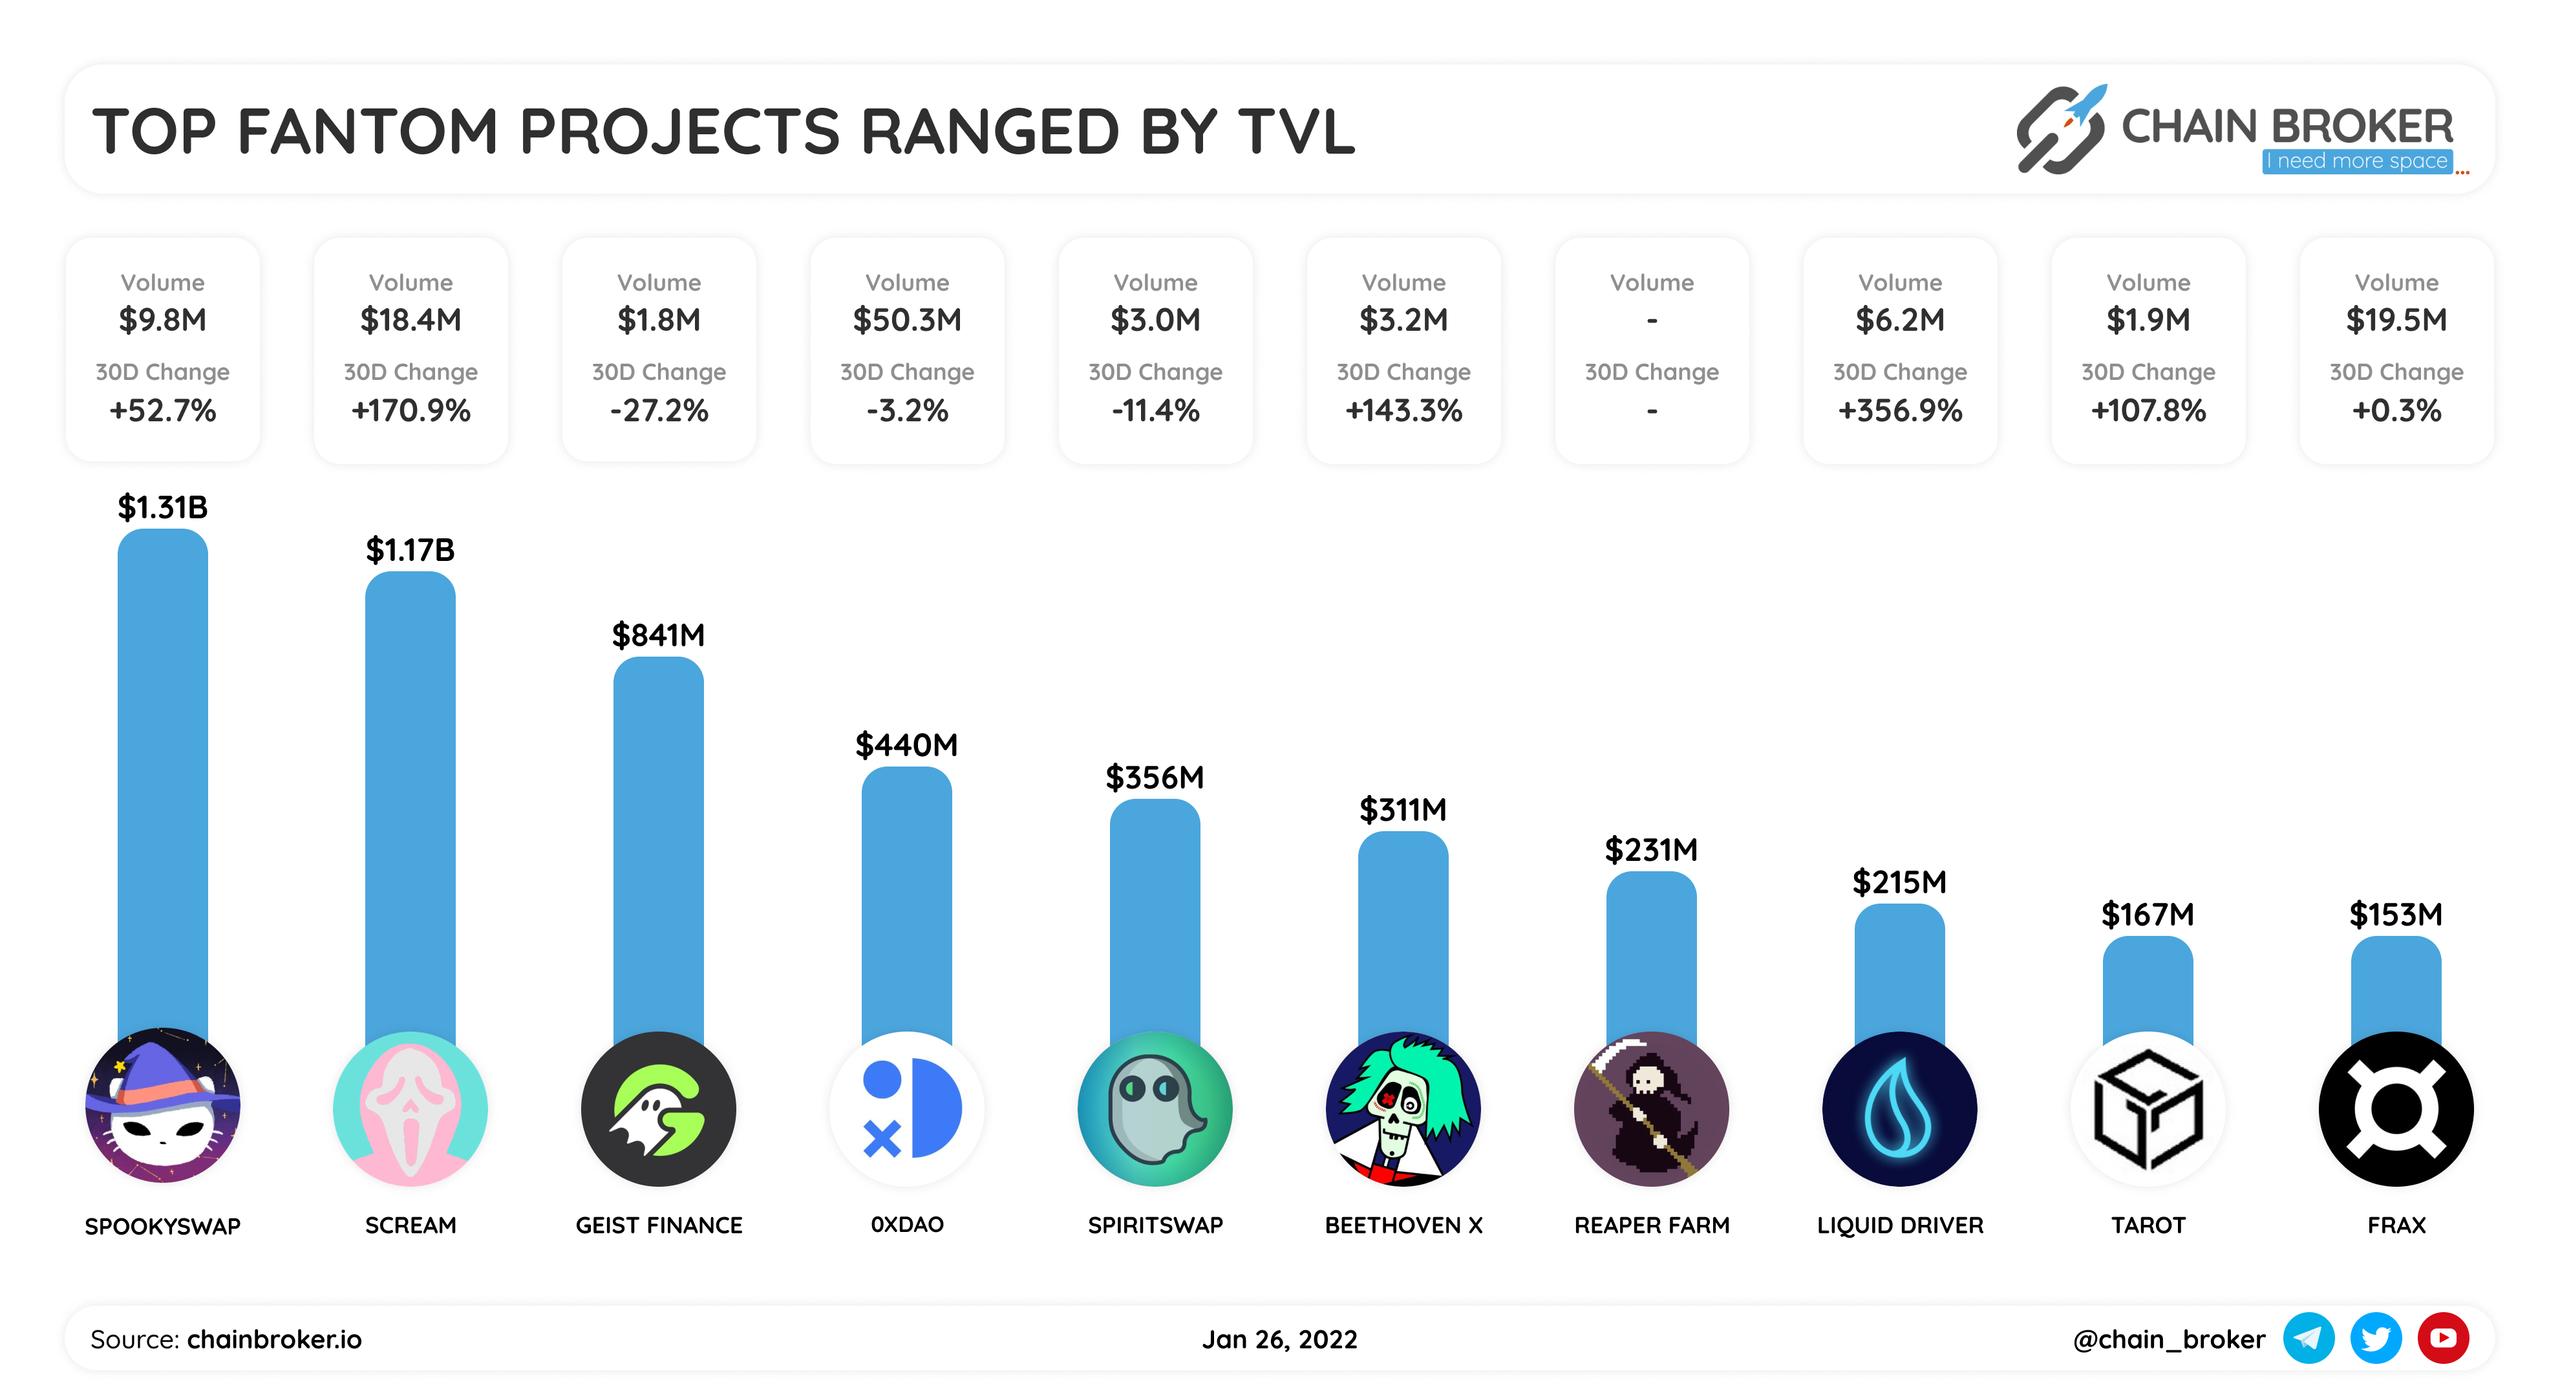 Top fantom projects ranged by TVL